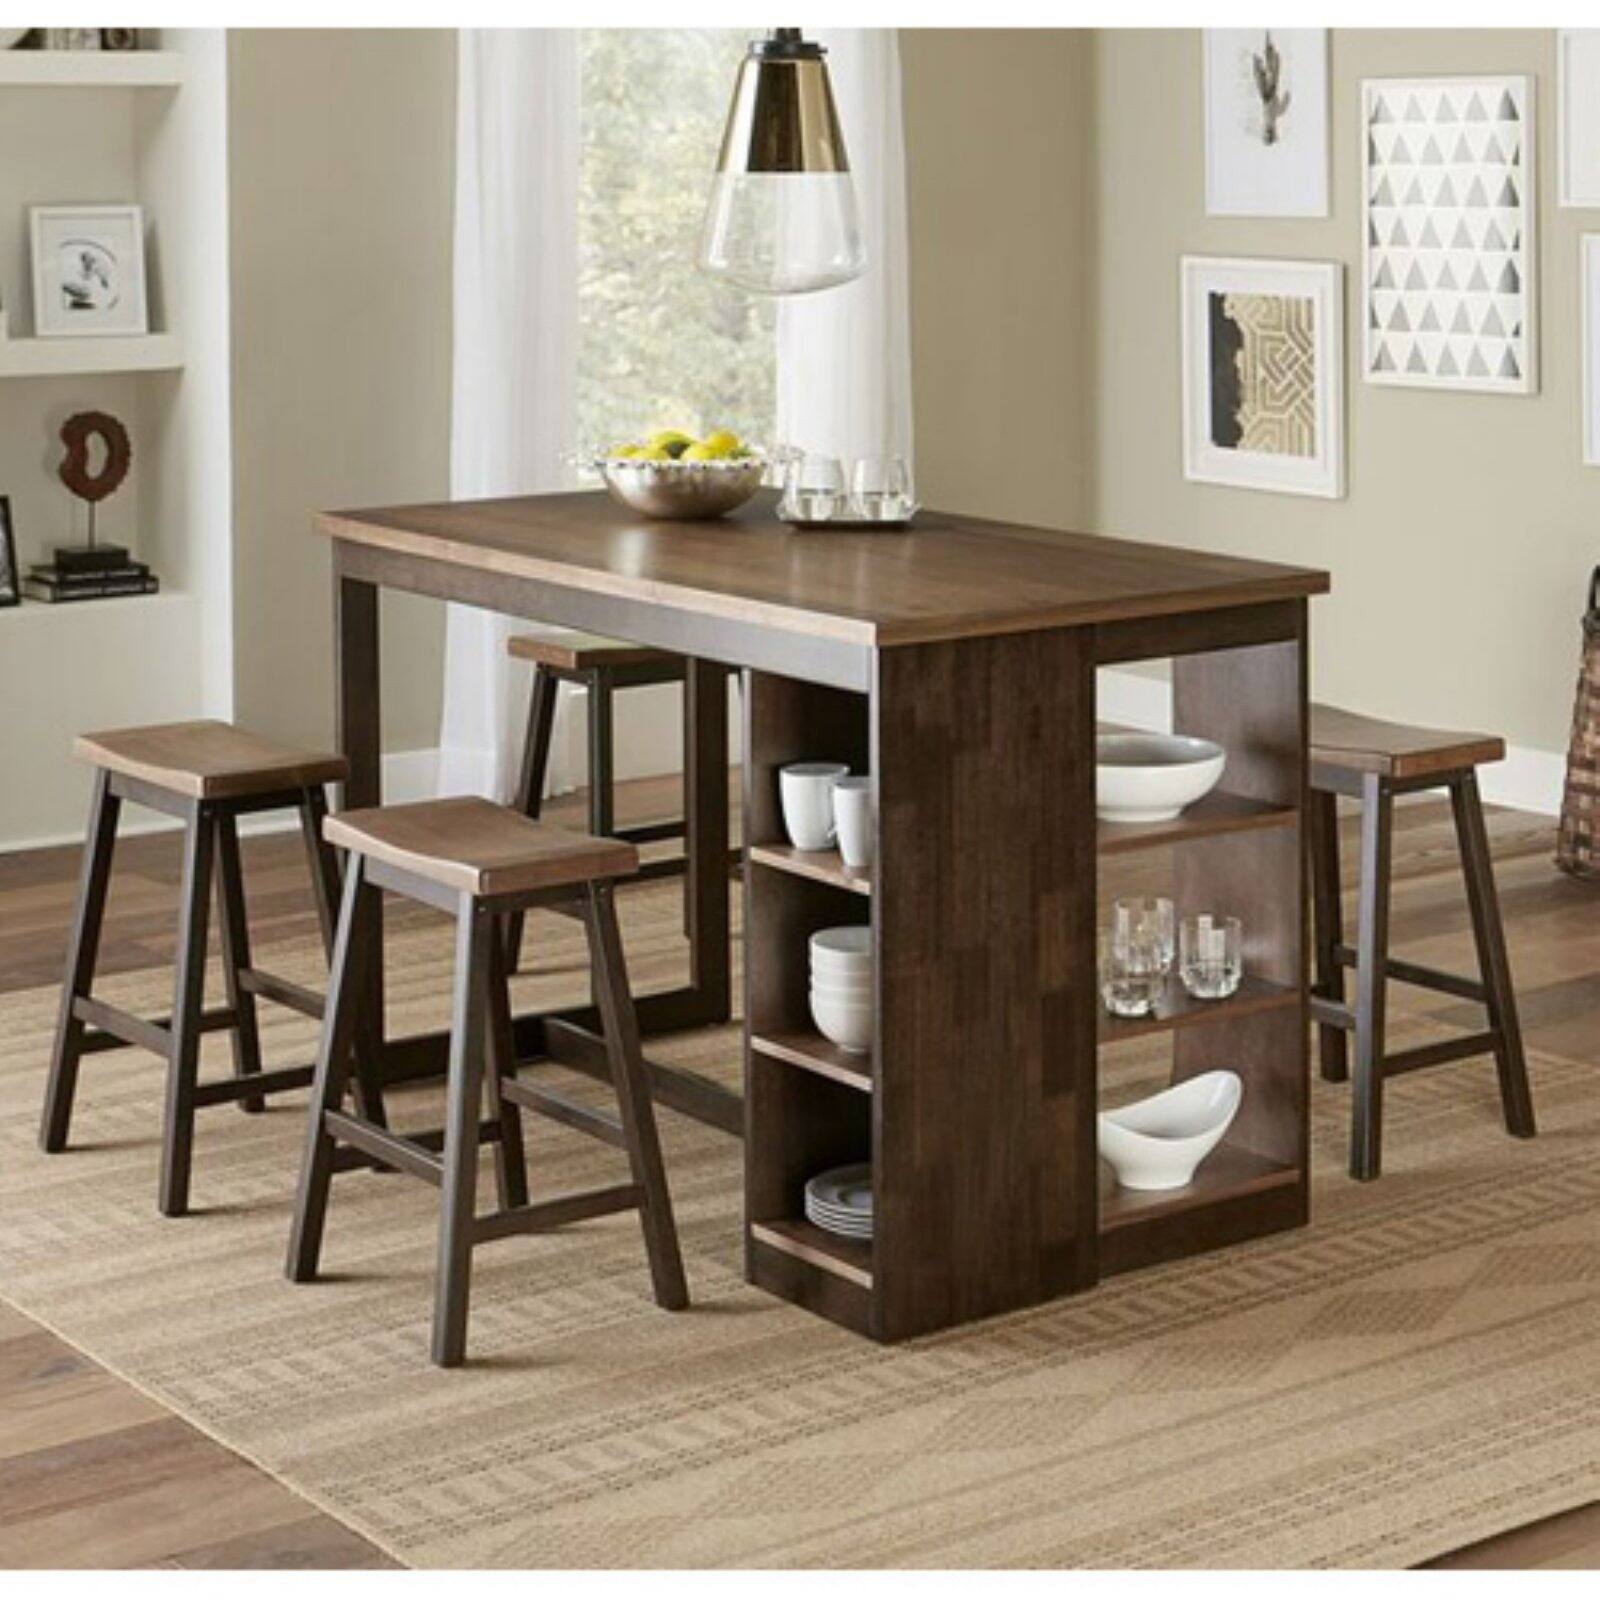 Progressive Furniture Kenny 5 Piece Counter Height Storage Dining Table Set with 6 Chairs, Walnut - image 1 of 1